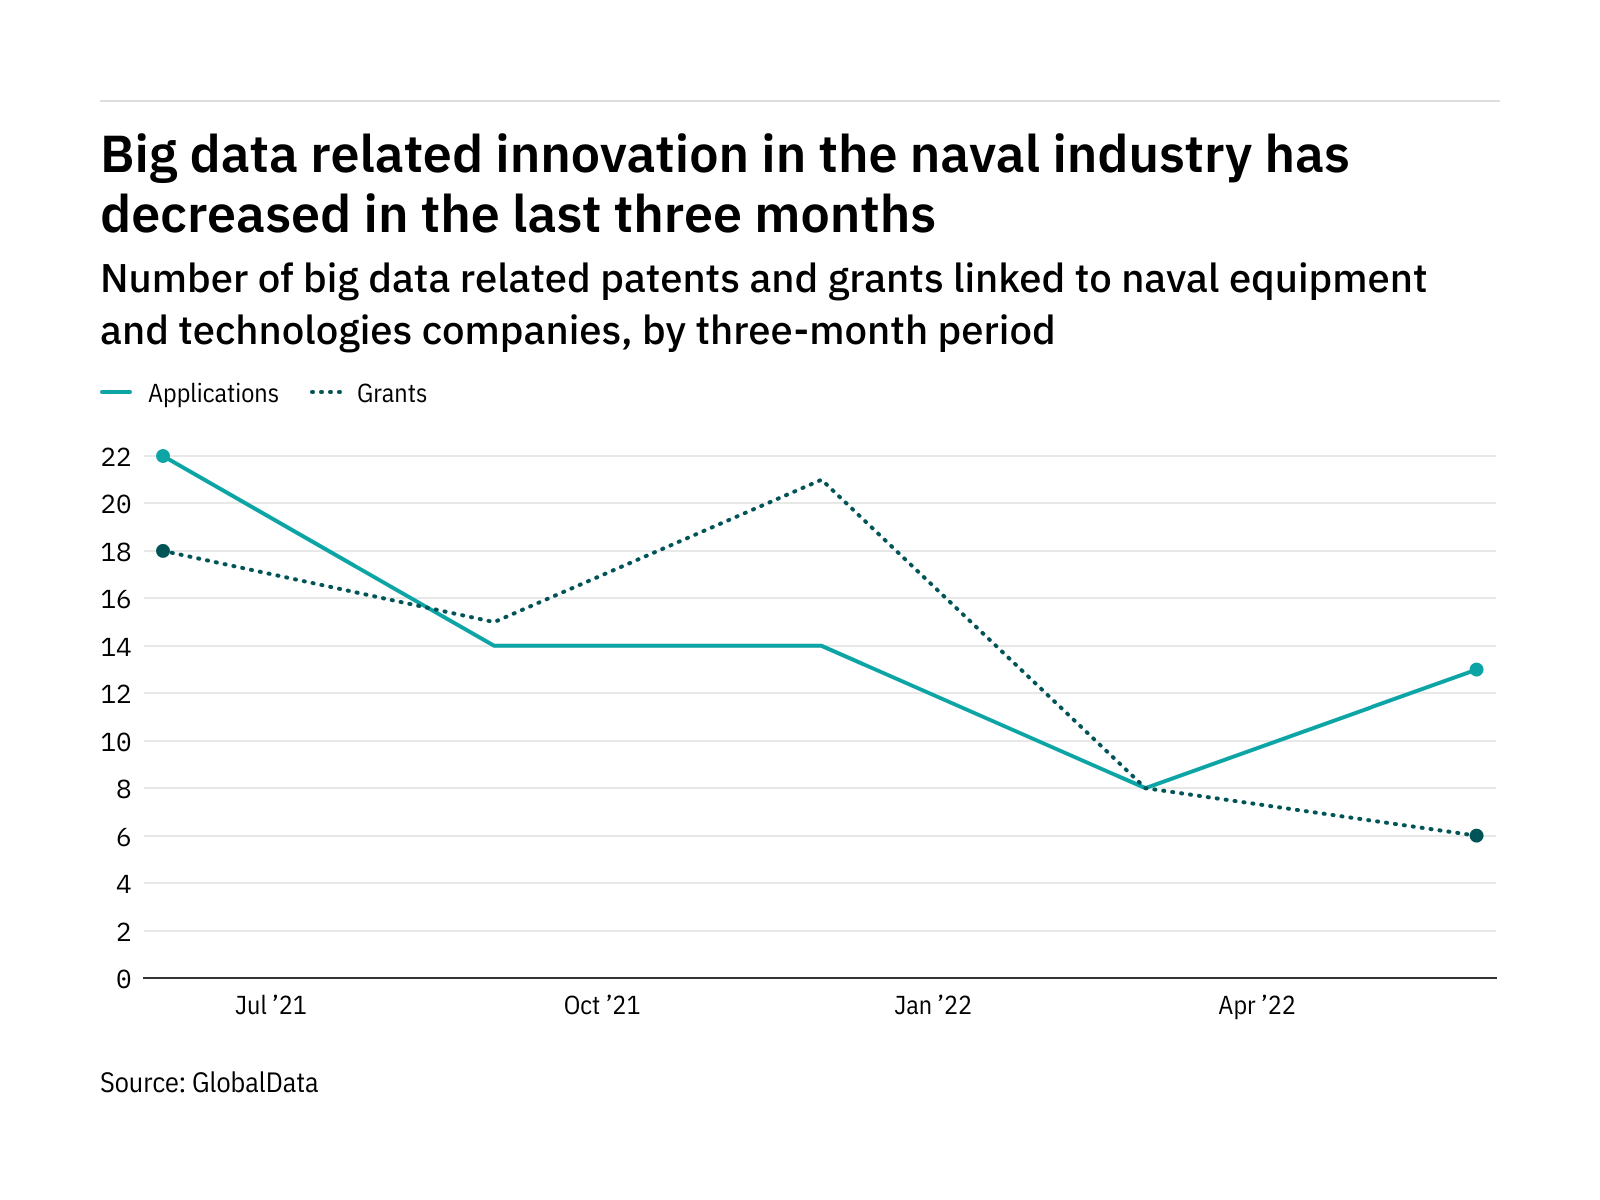 Big data innovation among naval industry companies has dropped off in the last year